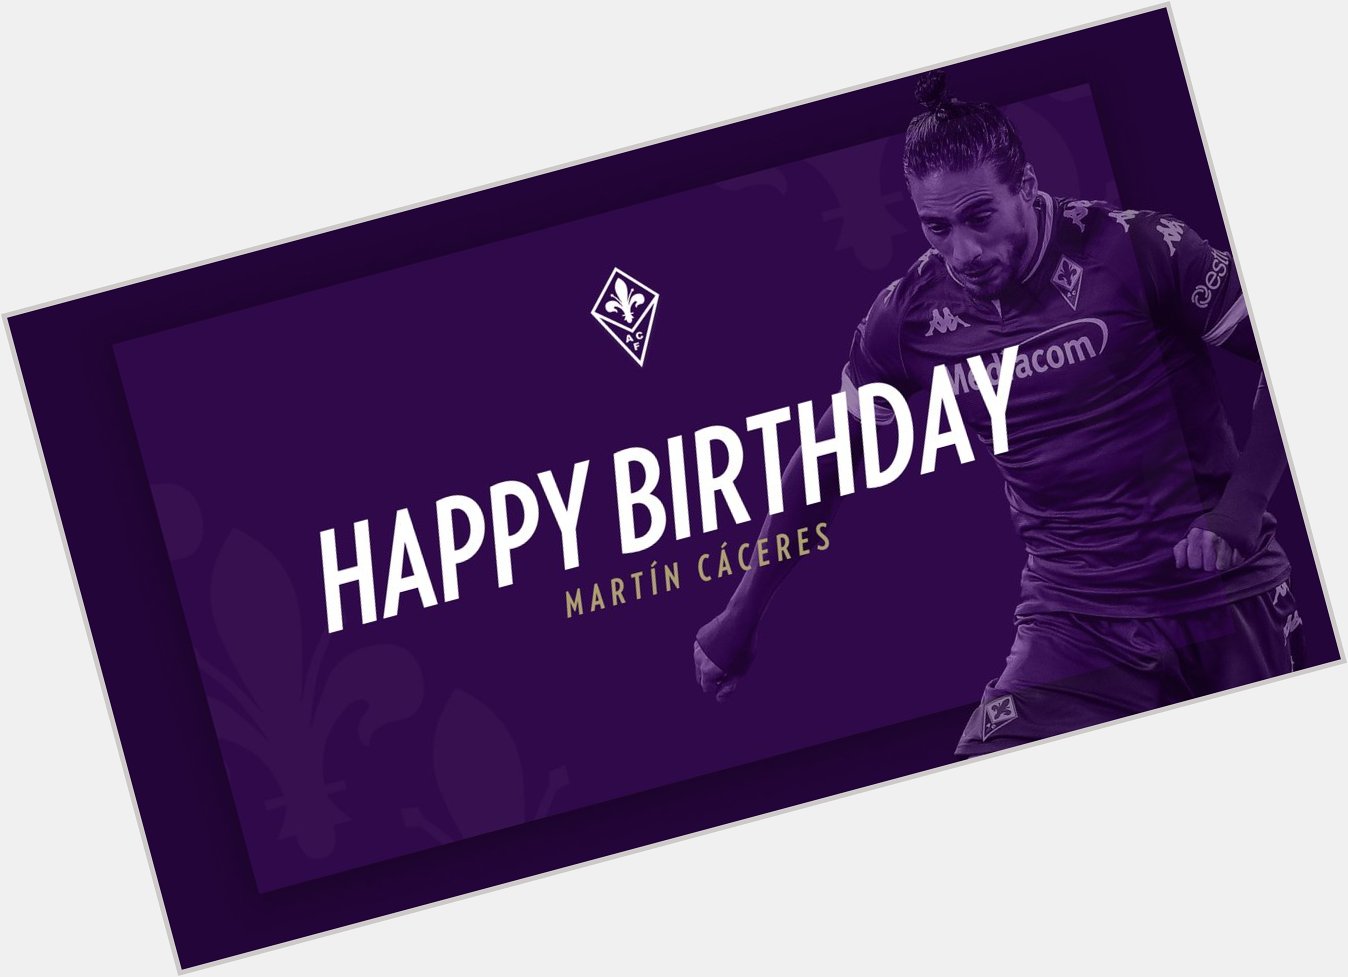 Happy Birthday, Martin Caceres Leave a comment to wish Martin a happy birthday    